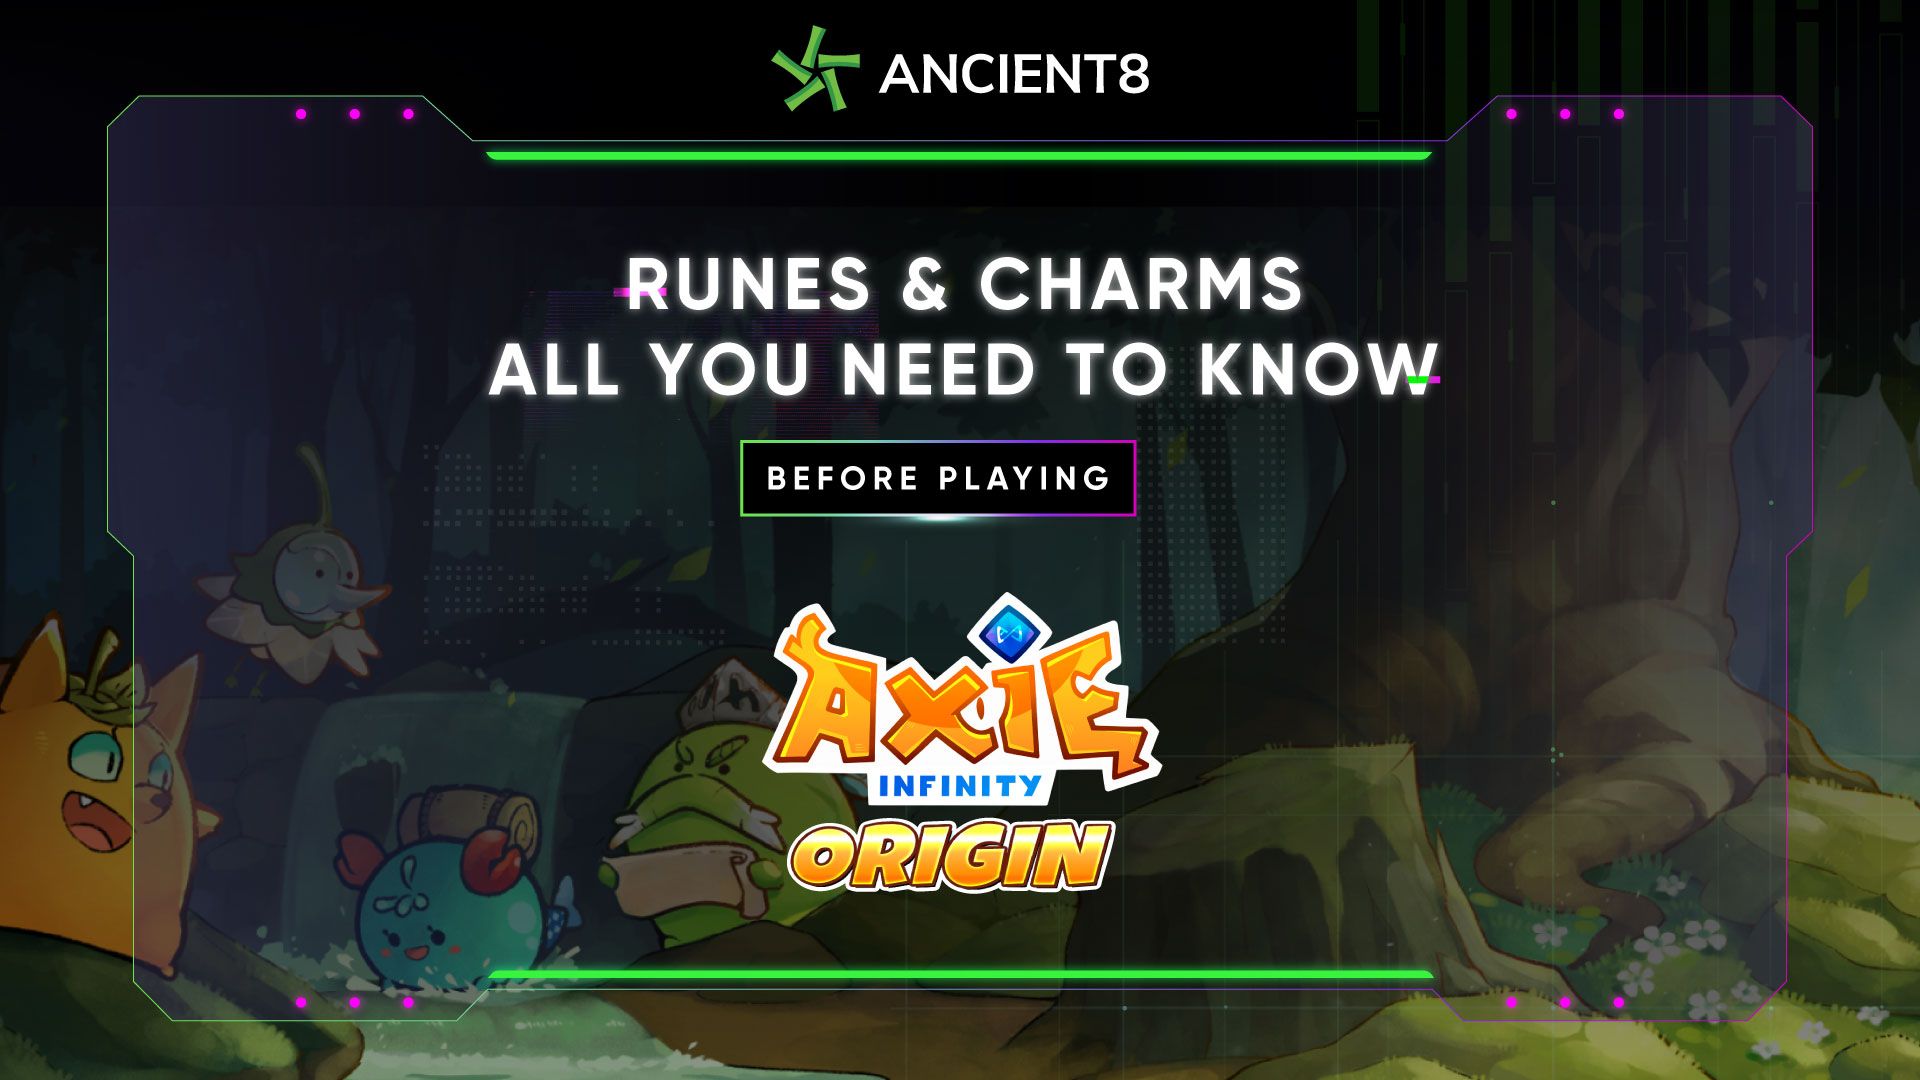 Runes & Charms - All you need to know